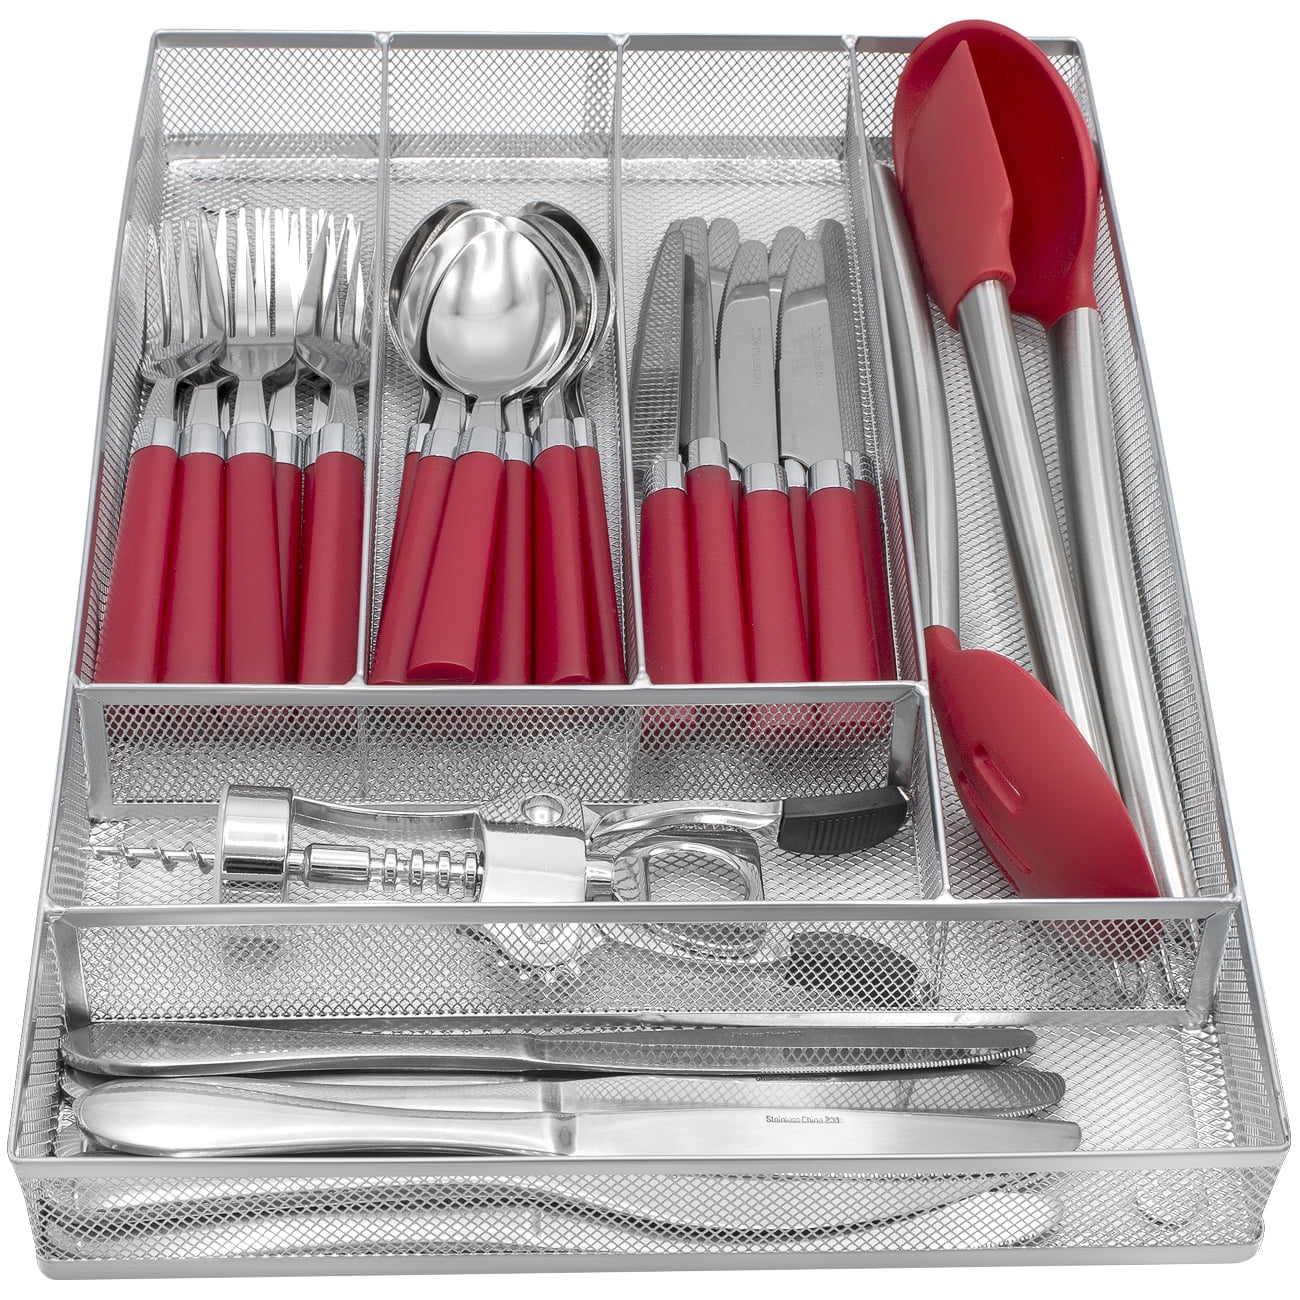 Details about   Small Silverware Utensil Cutlery Organizer Holder Tray for Narrow Drawers Drawer 